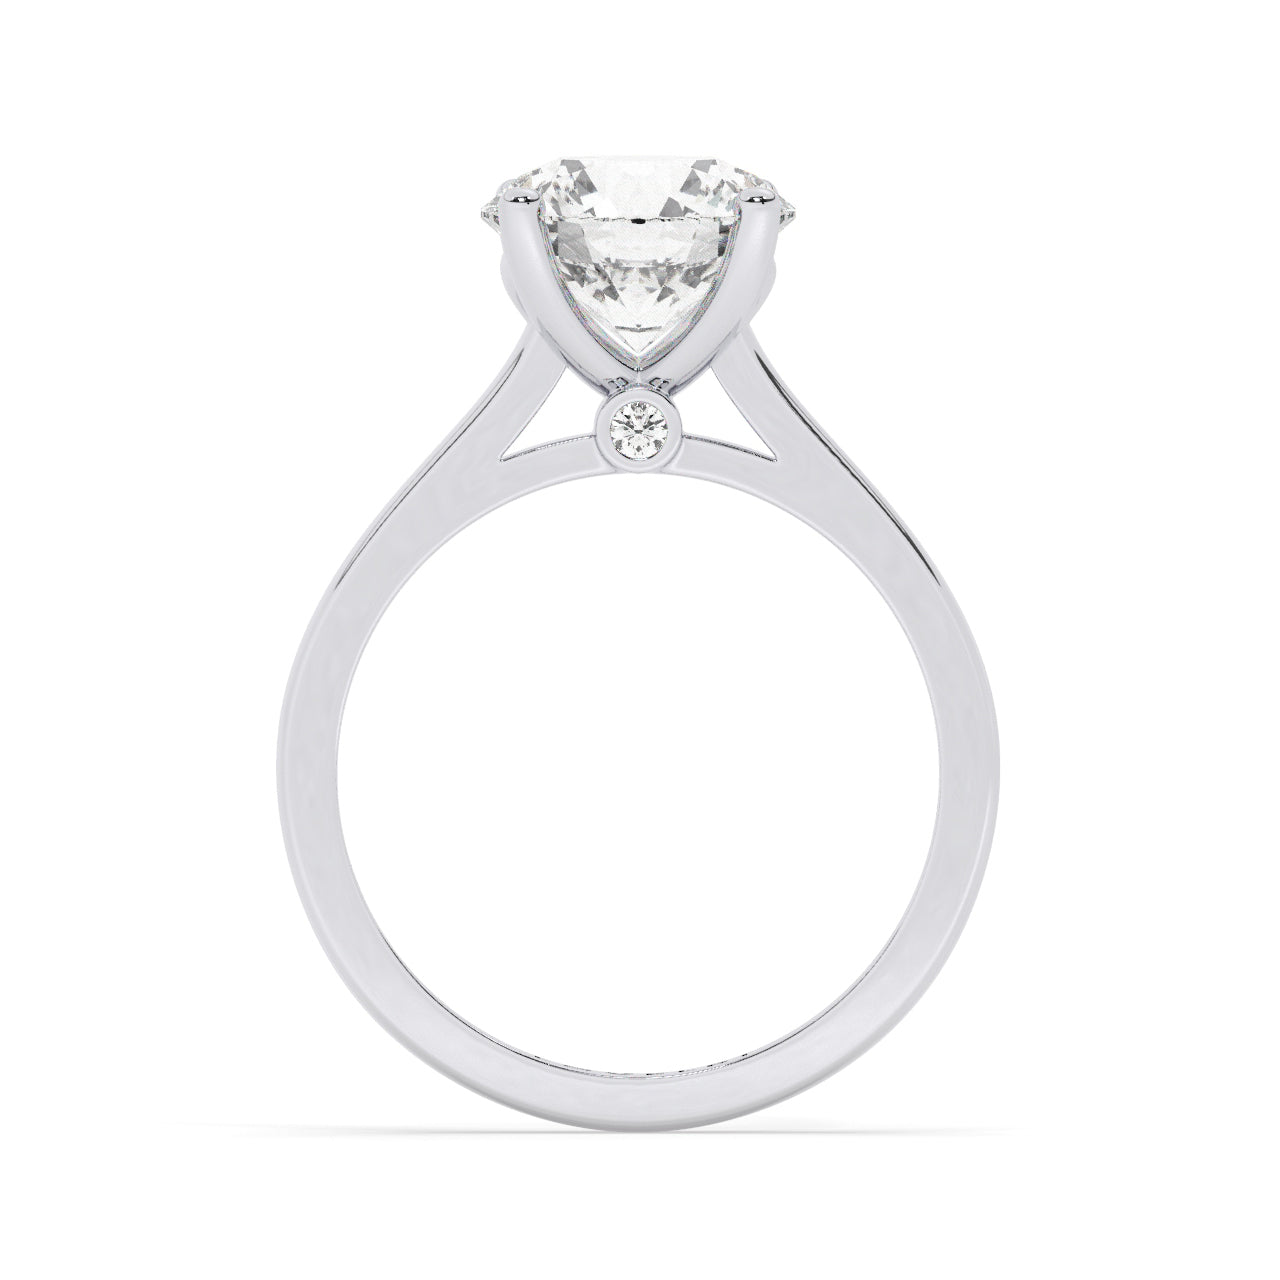 White Gold Round Cut Solitaire Engagement Ring with a Hidden Stone - Side View